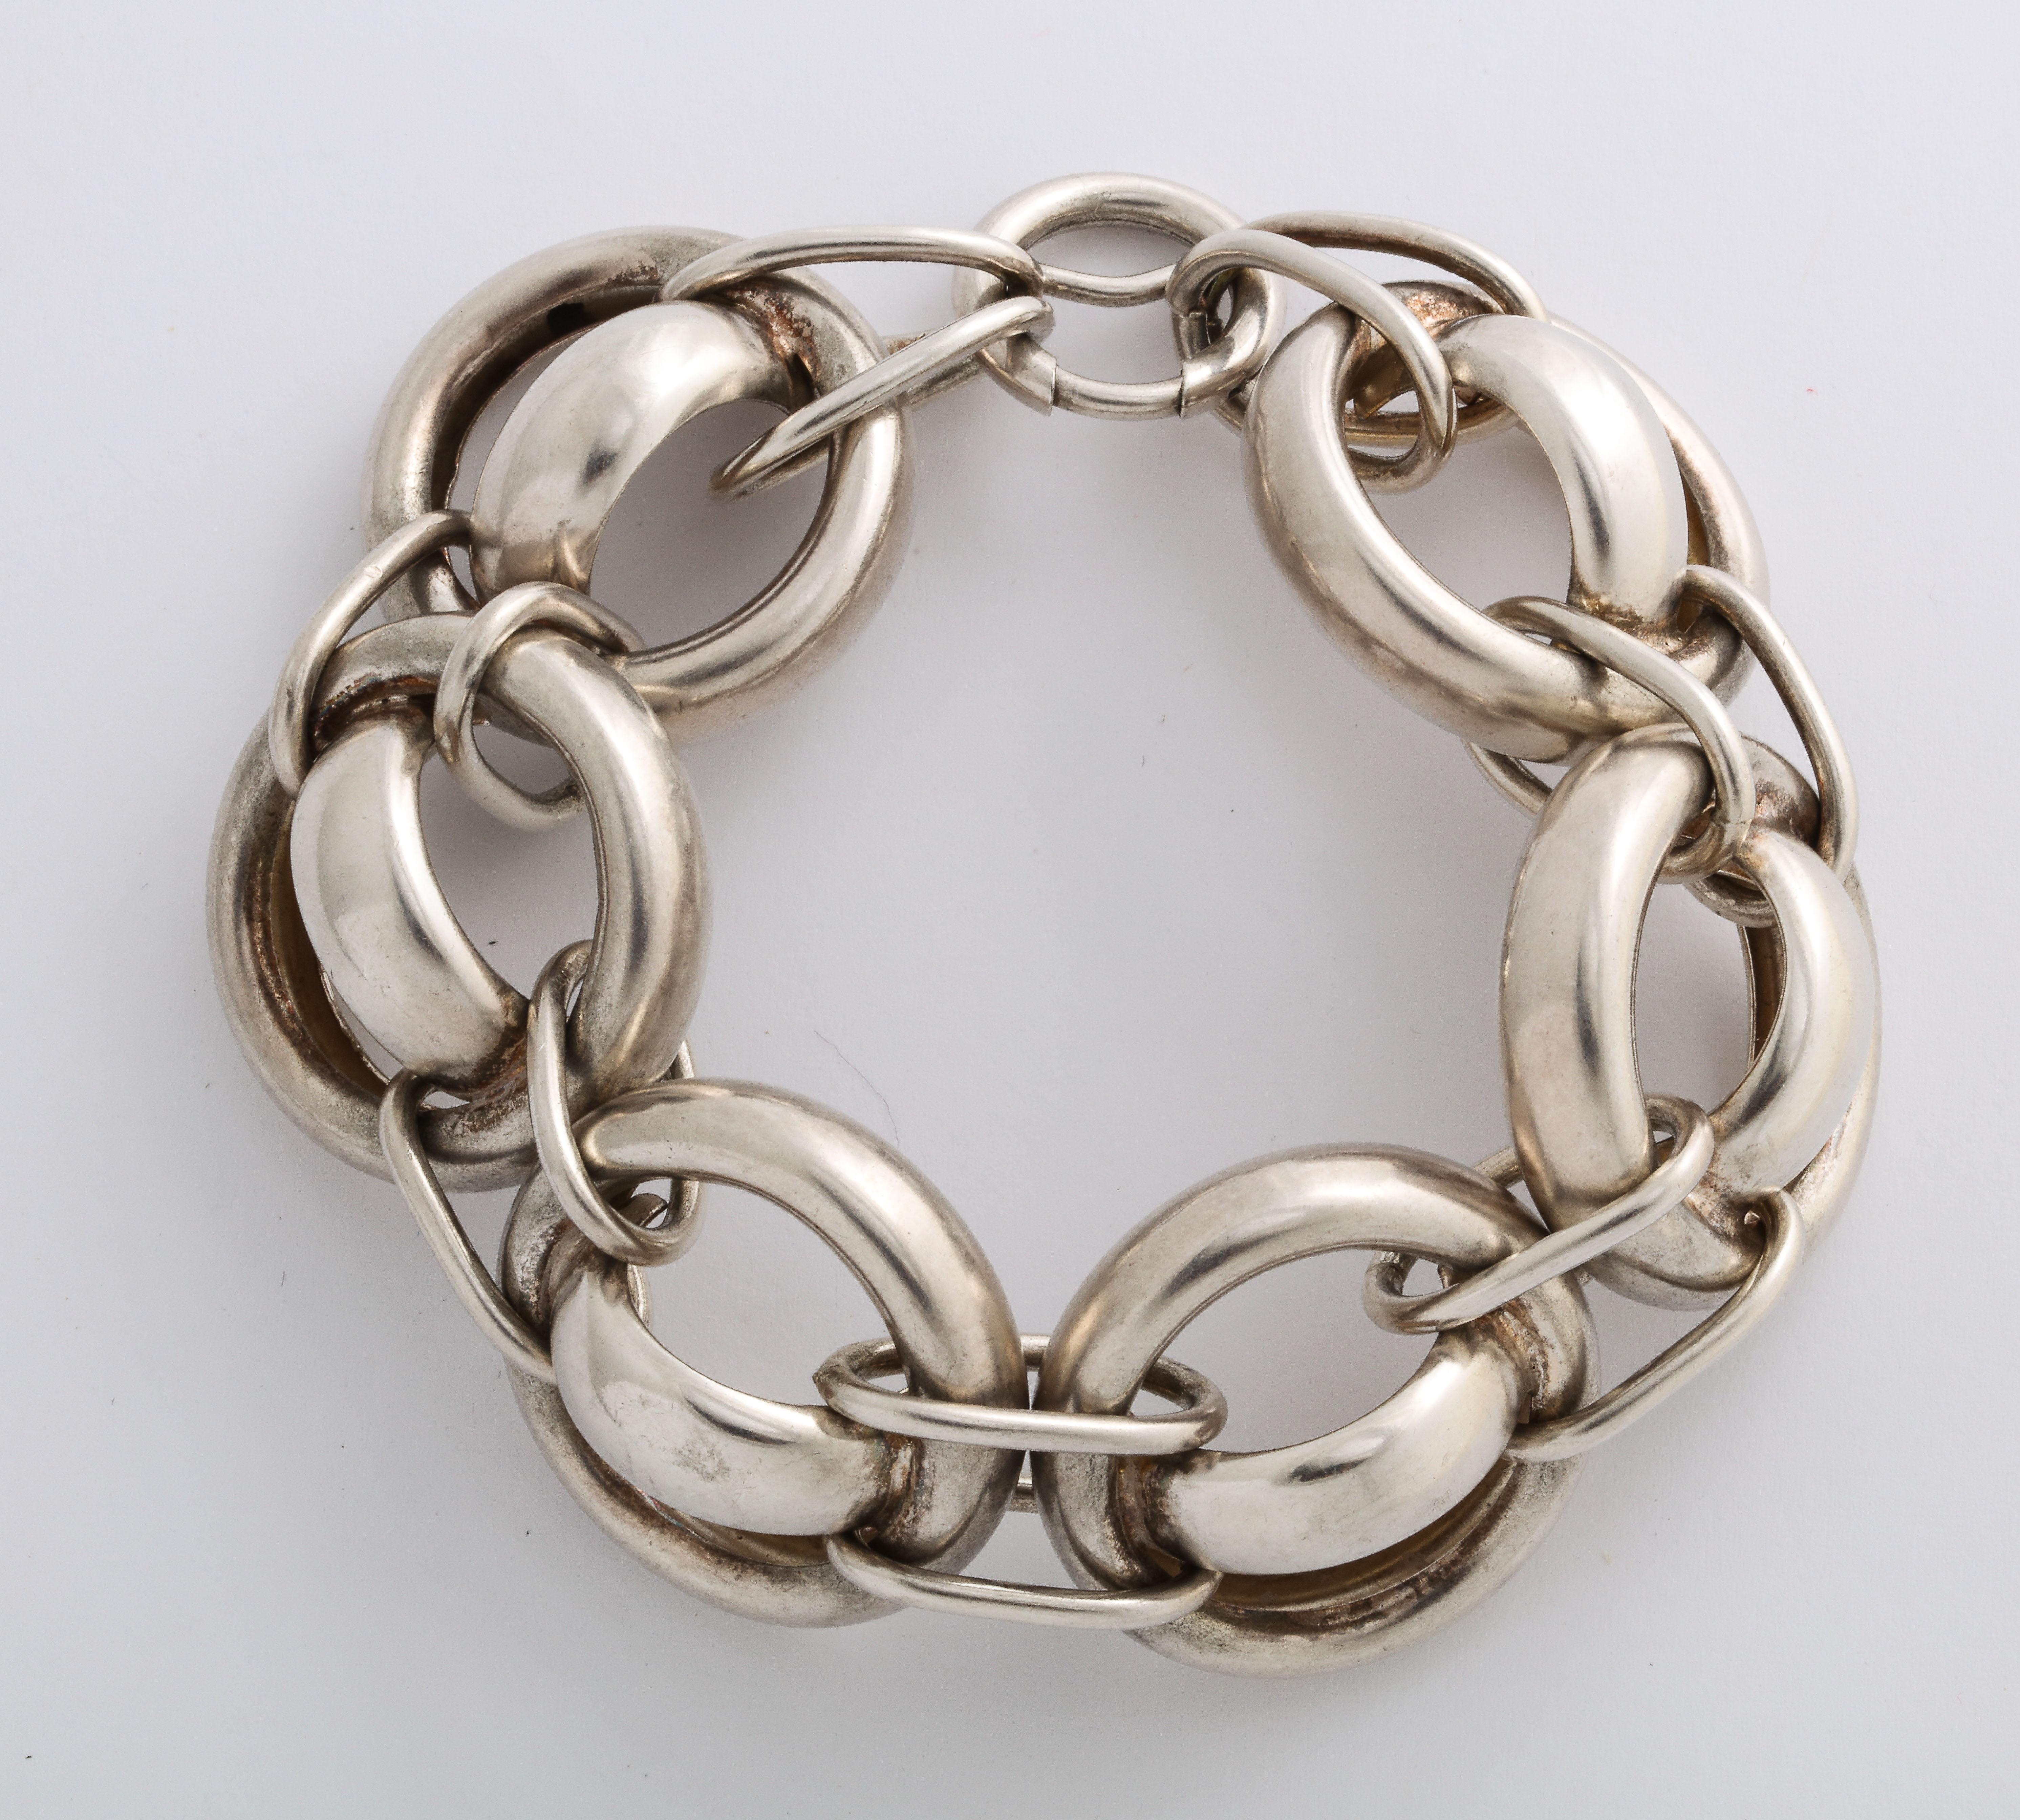 Unusually large for a Vintage mid century bracelet, bold, and chunky, this silver bracelet is as stunning as it is fun. The links are round with a horizontal curved link in the center. Each inch large circle is connected by two horizontal links to